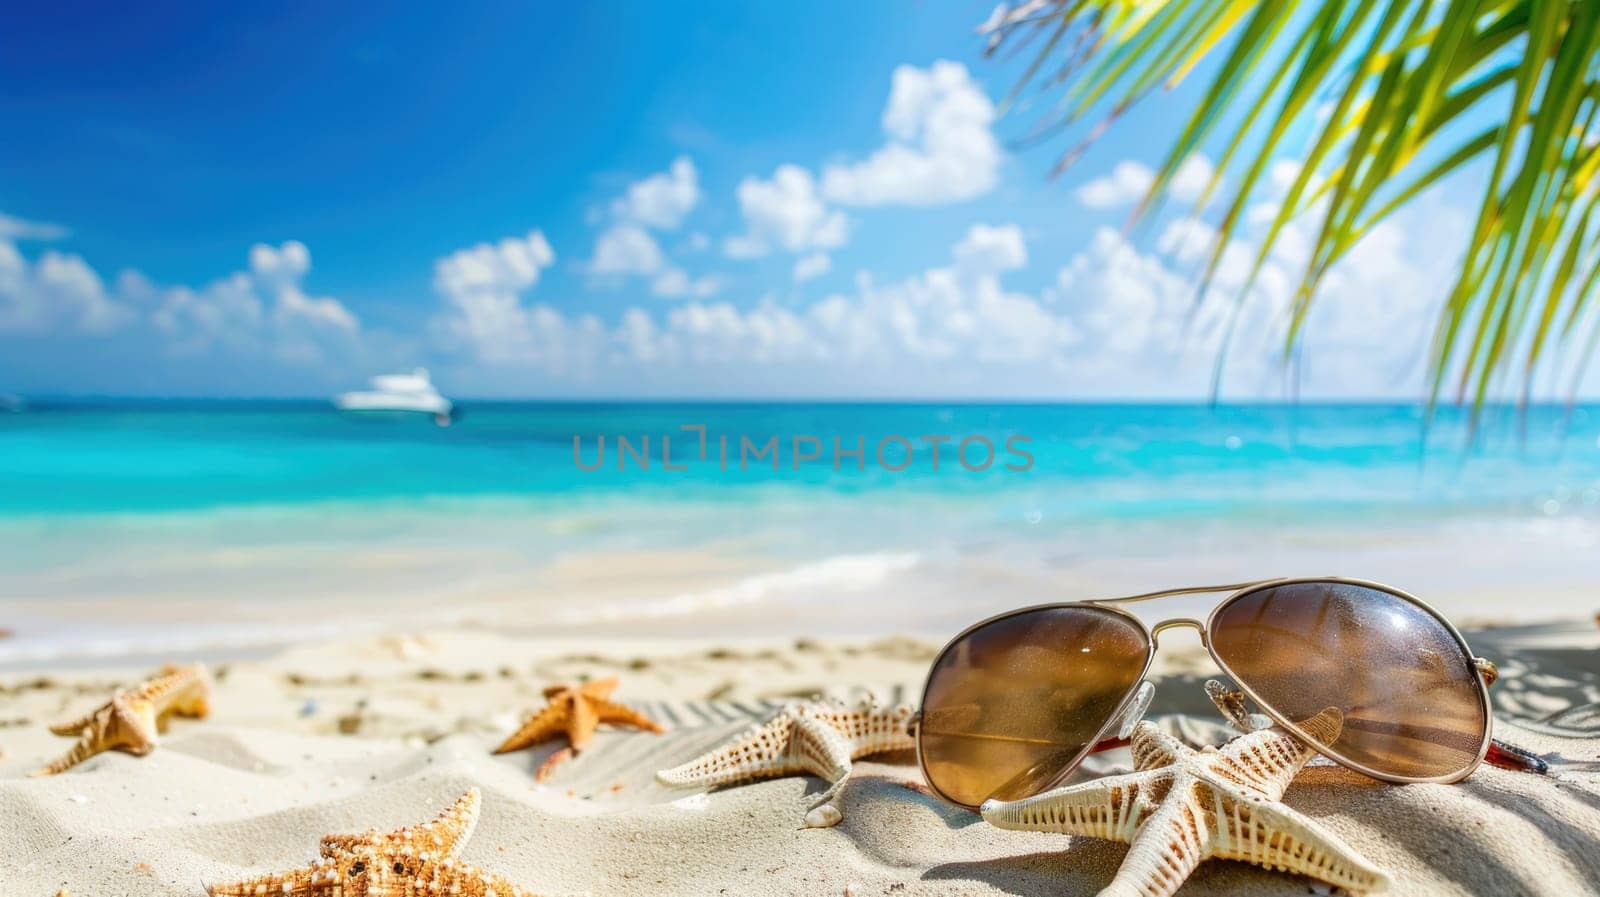 A pair of sunglasses and a starfish are on a beach.